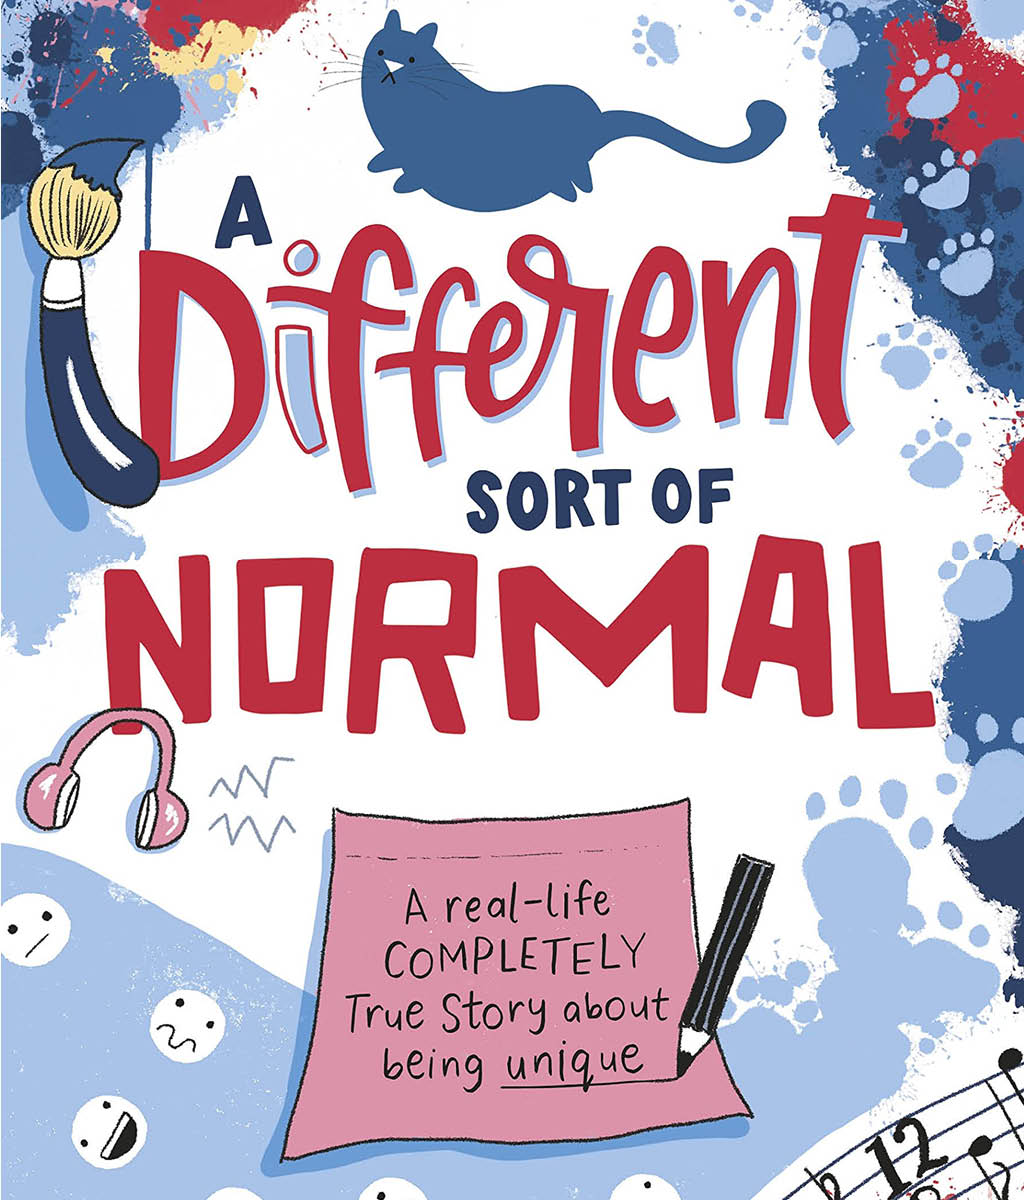 A Different Sort of Normal by Abigail Balfe